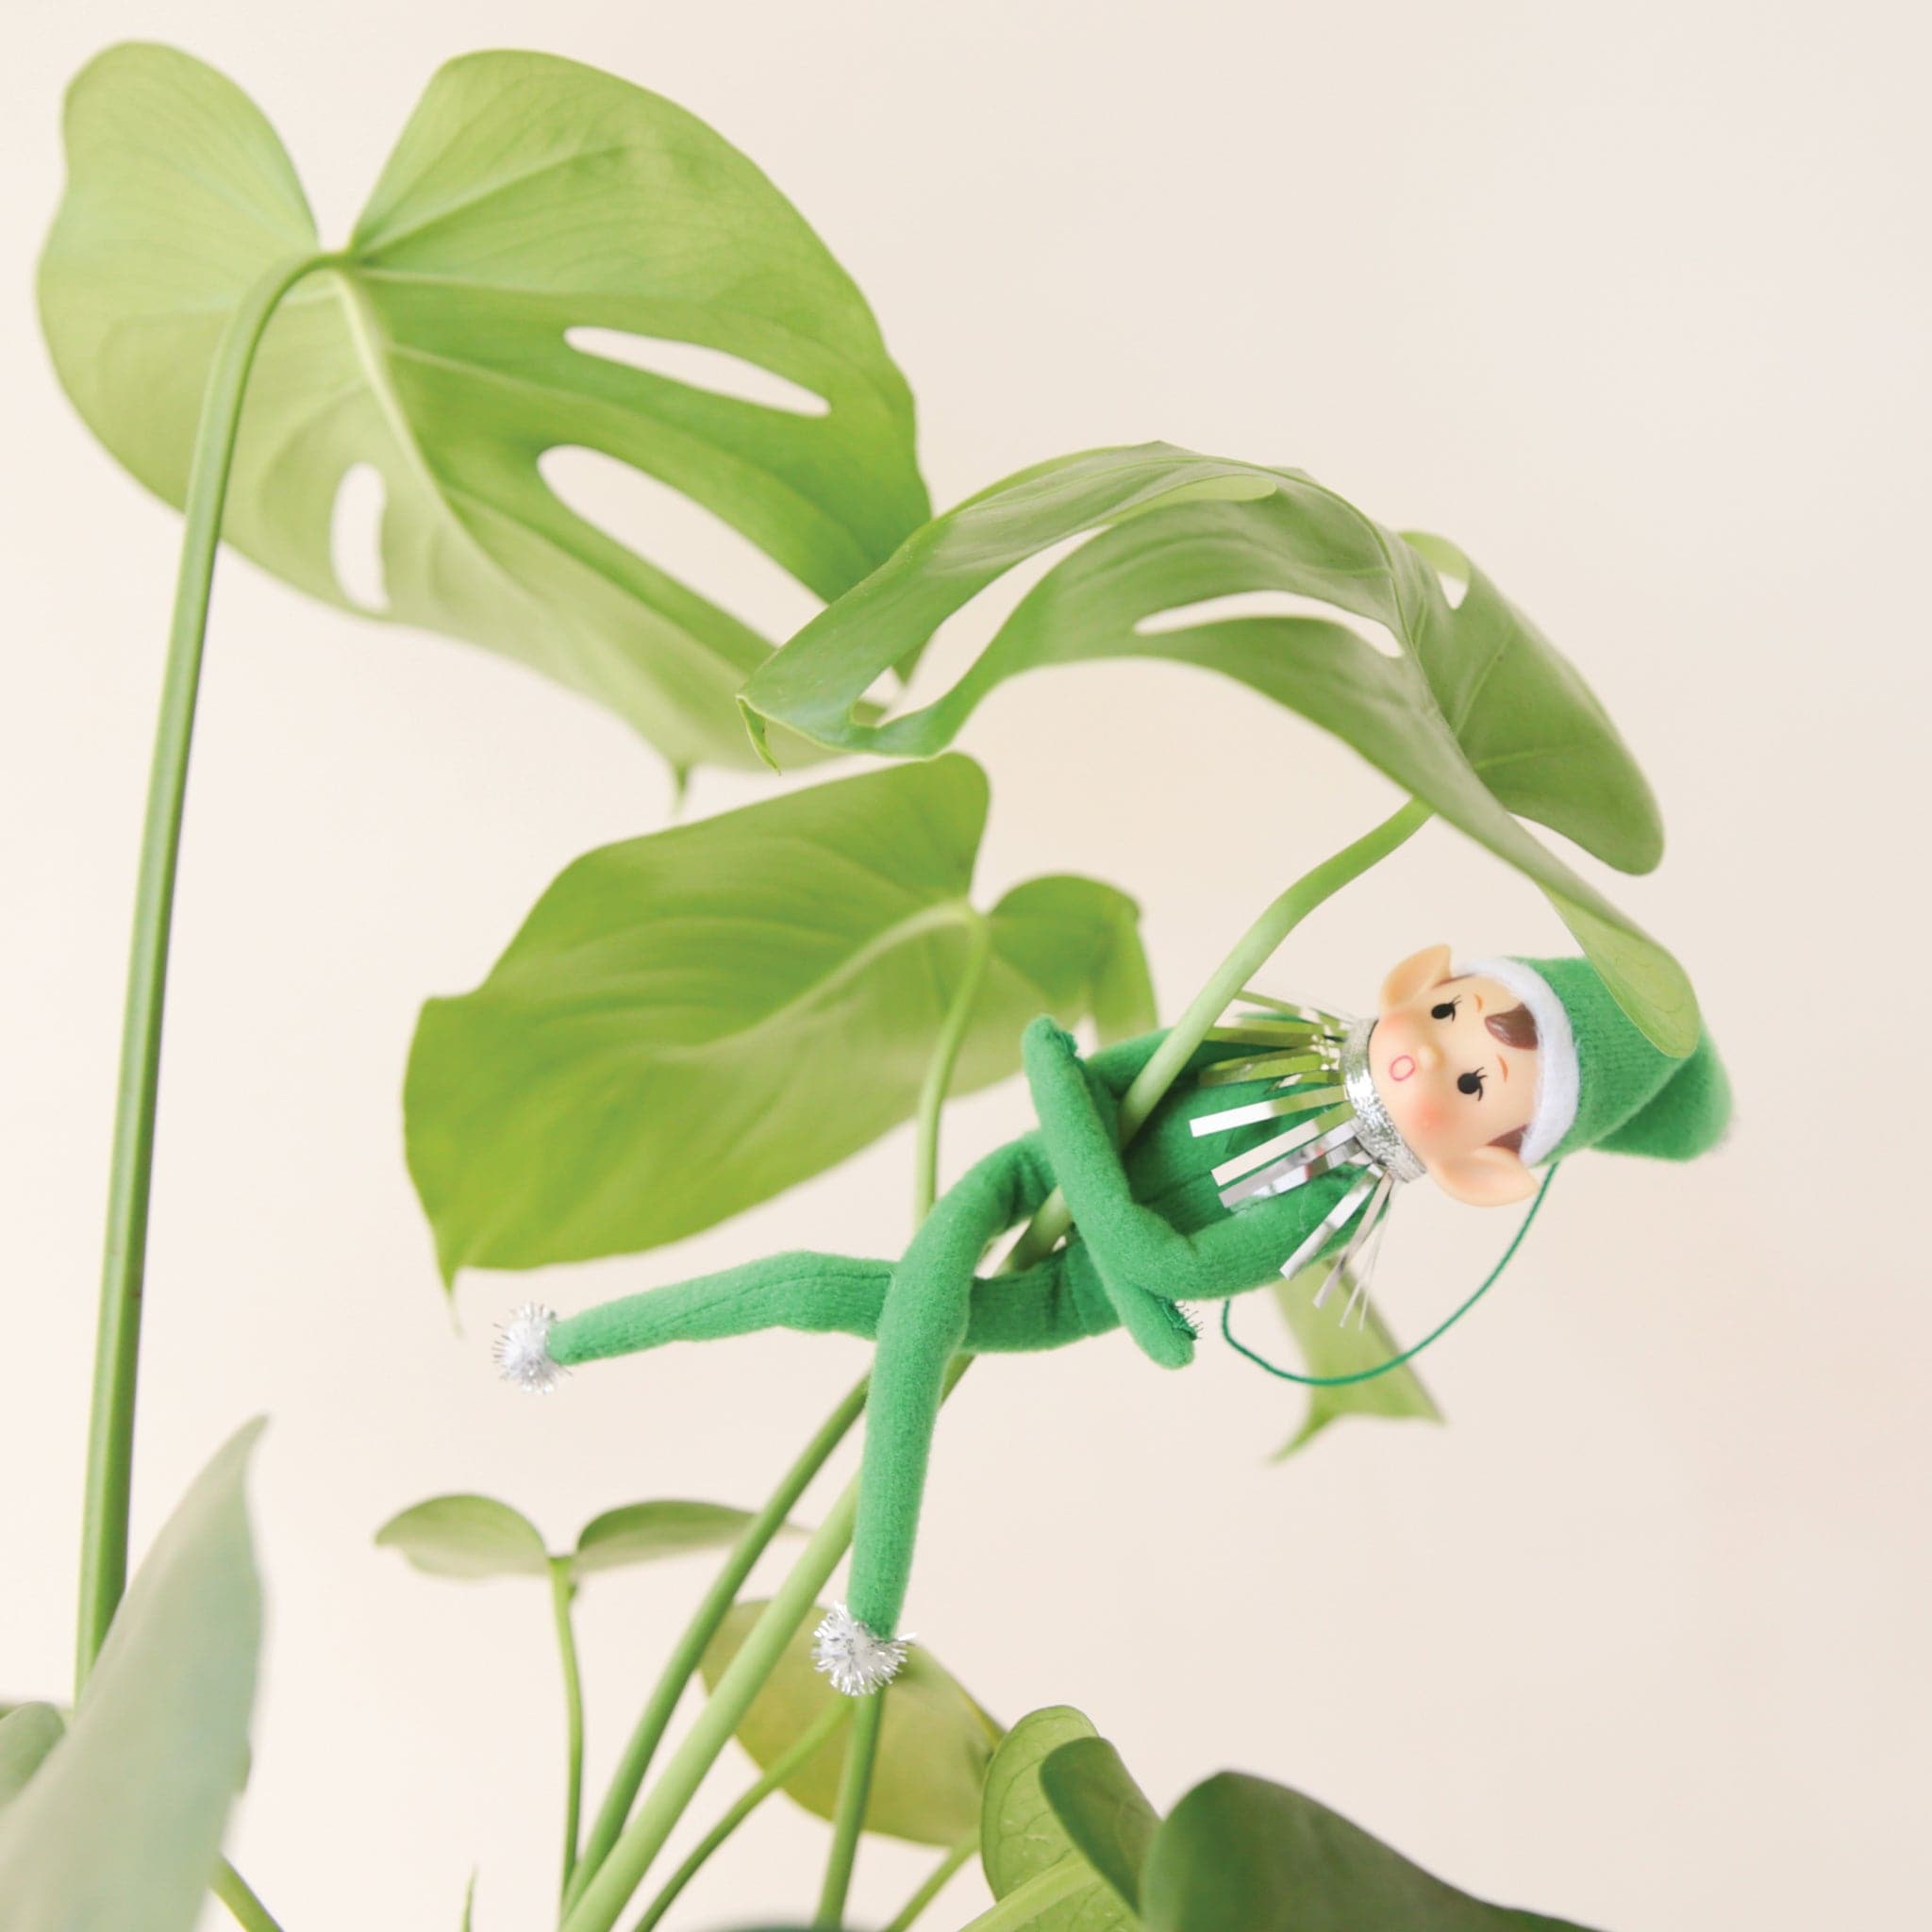 On a cream background is a green elf ornament with bendy arms and legs and a green loop for hanging. In this photo the elf is wrapped around a green house plant. 